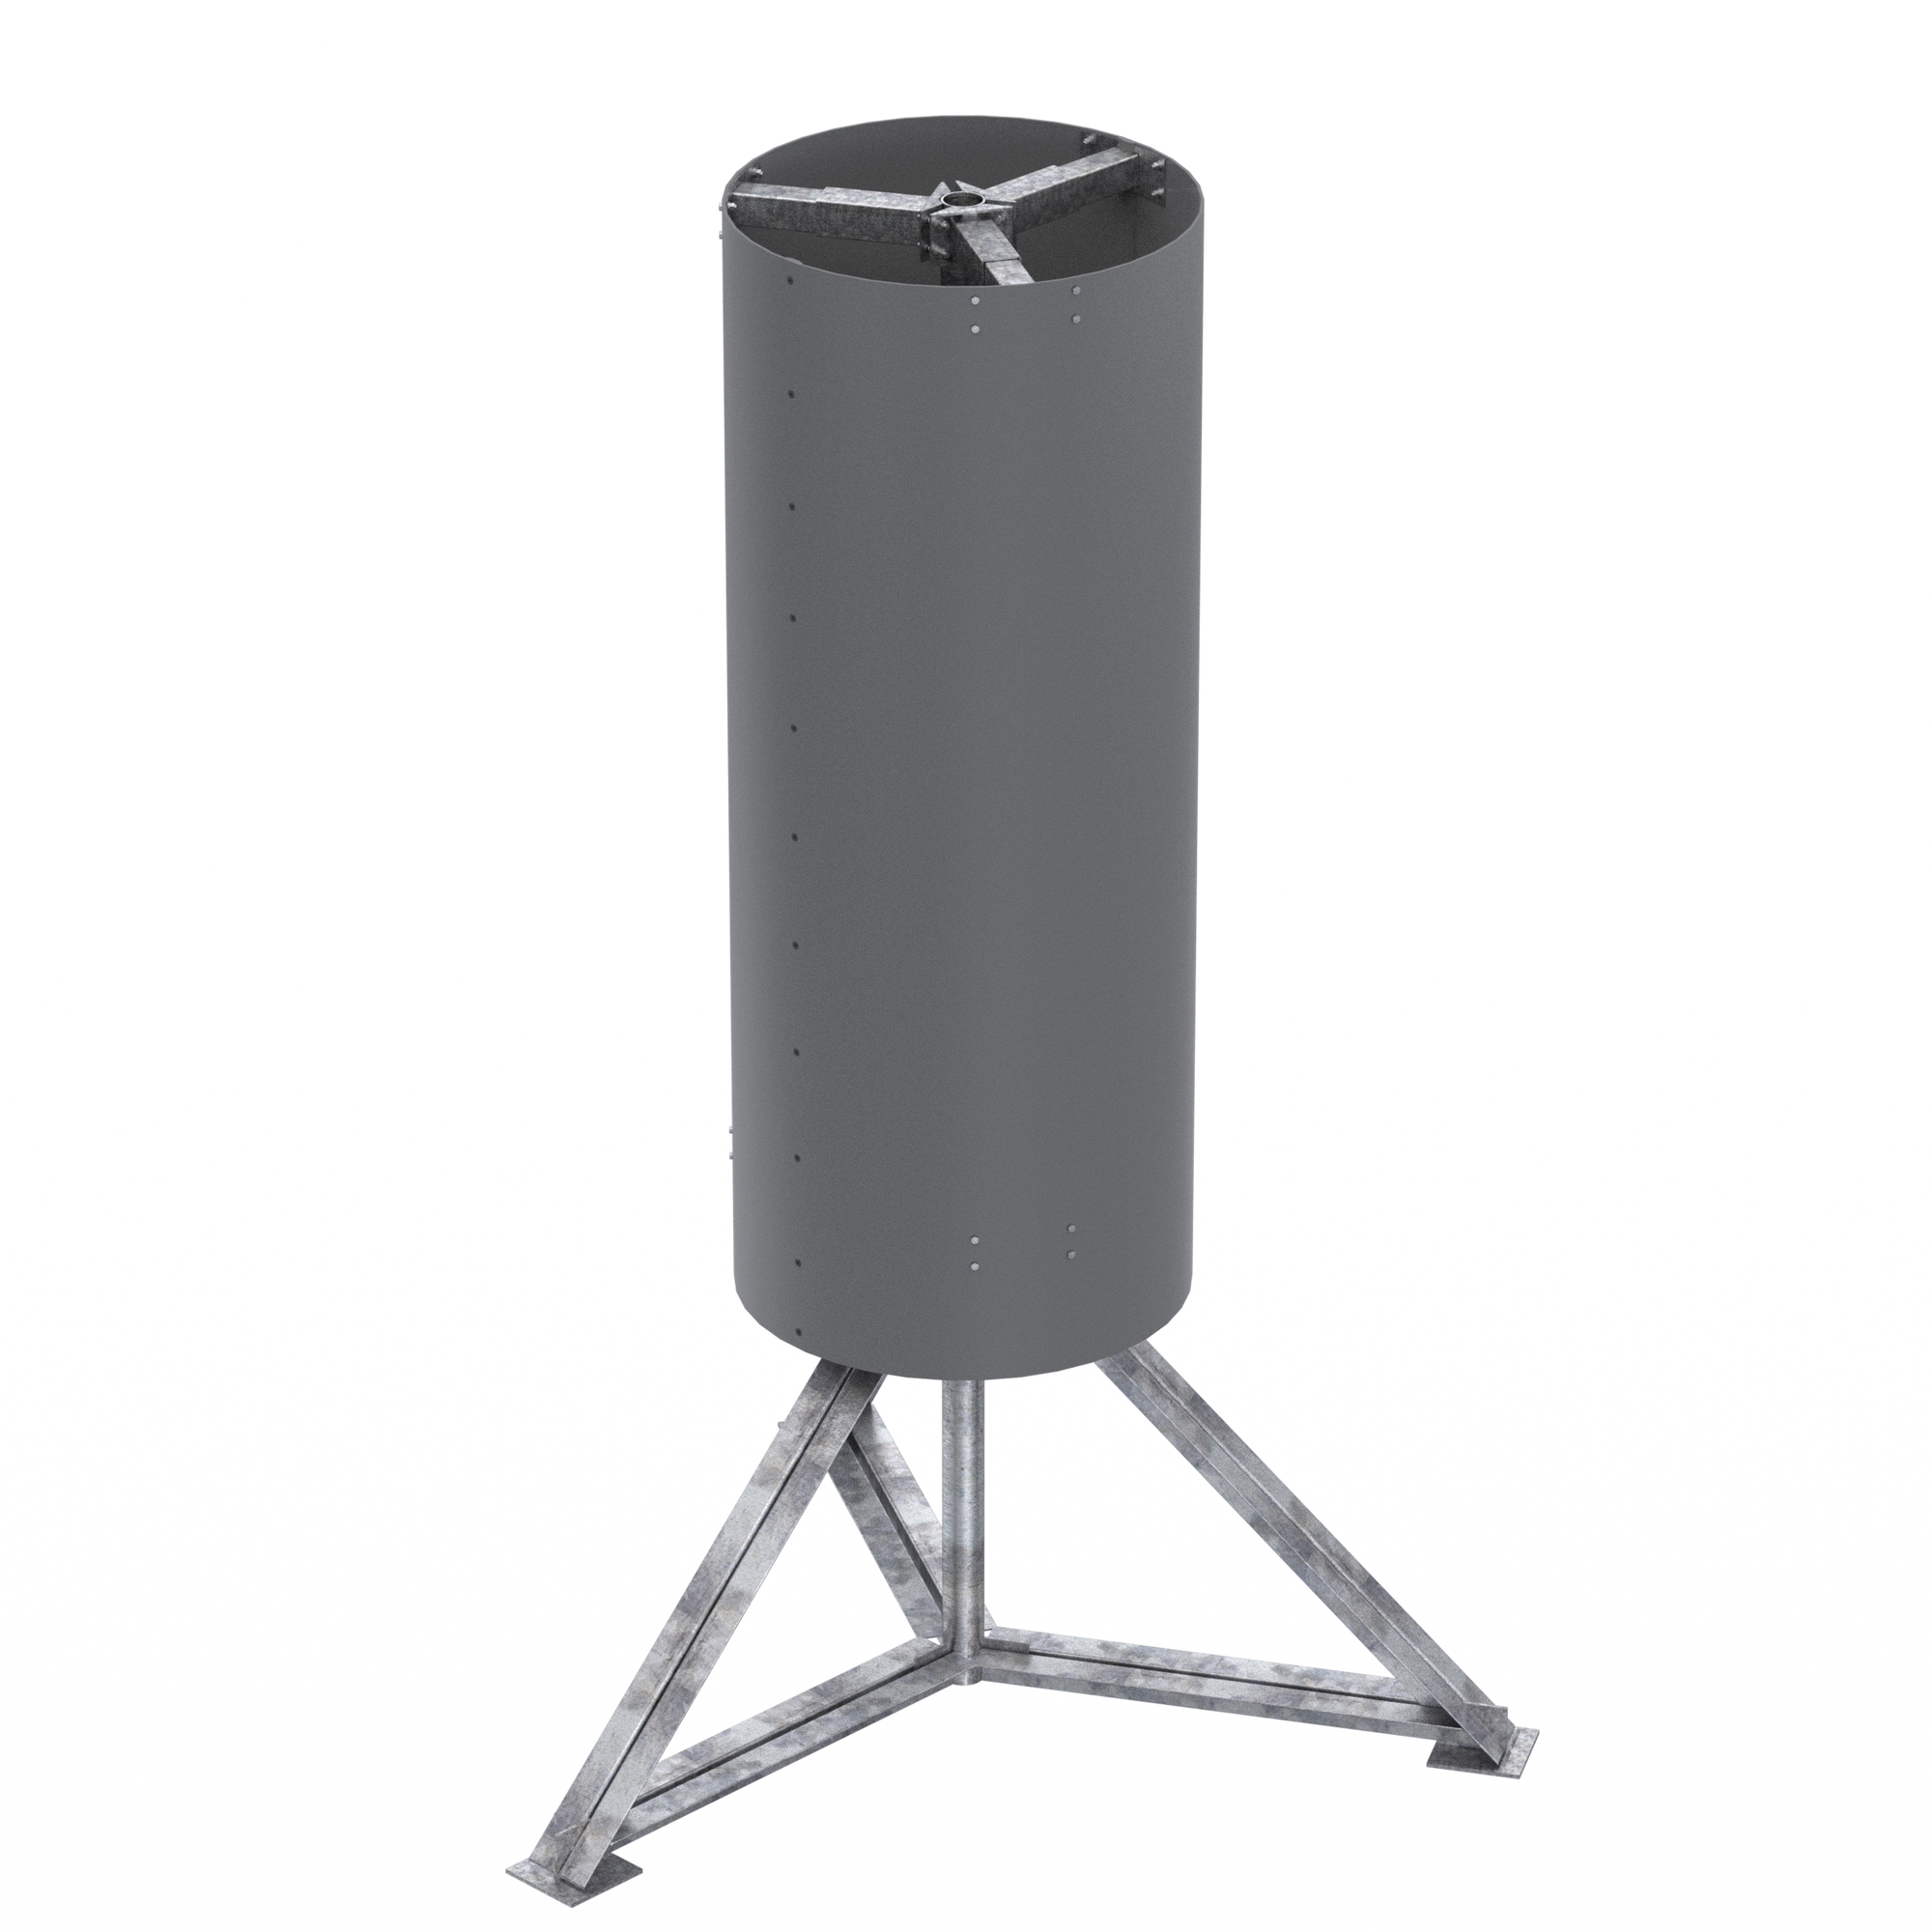 4'-0" Wide x Optional Height - Two Part Radome